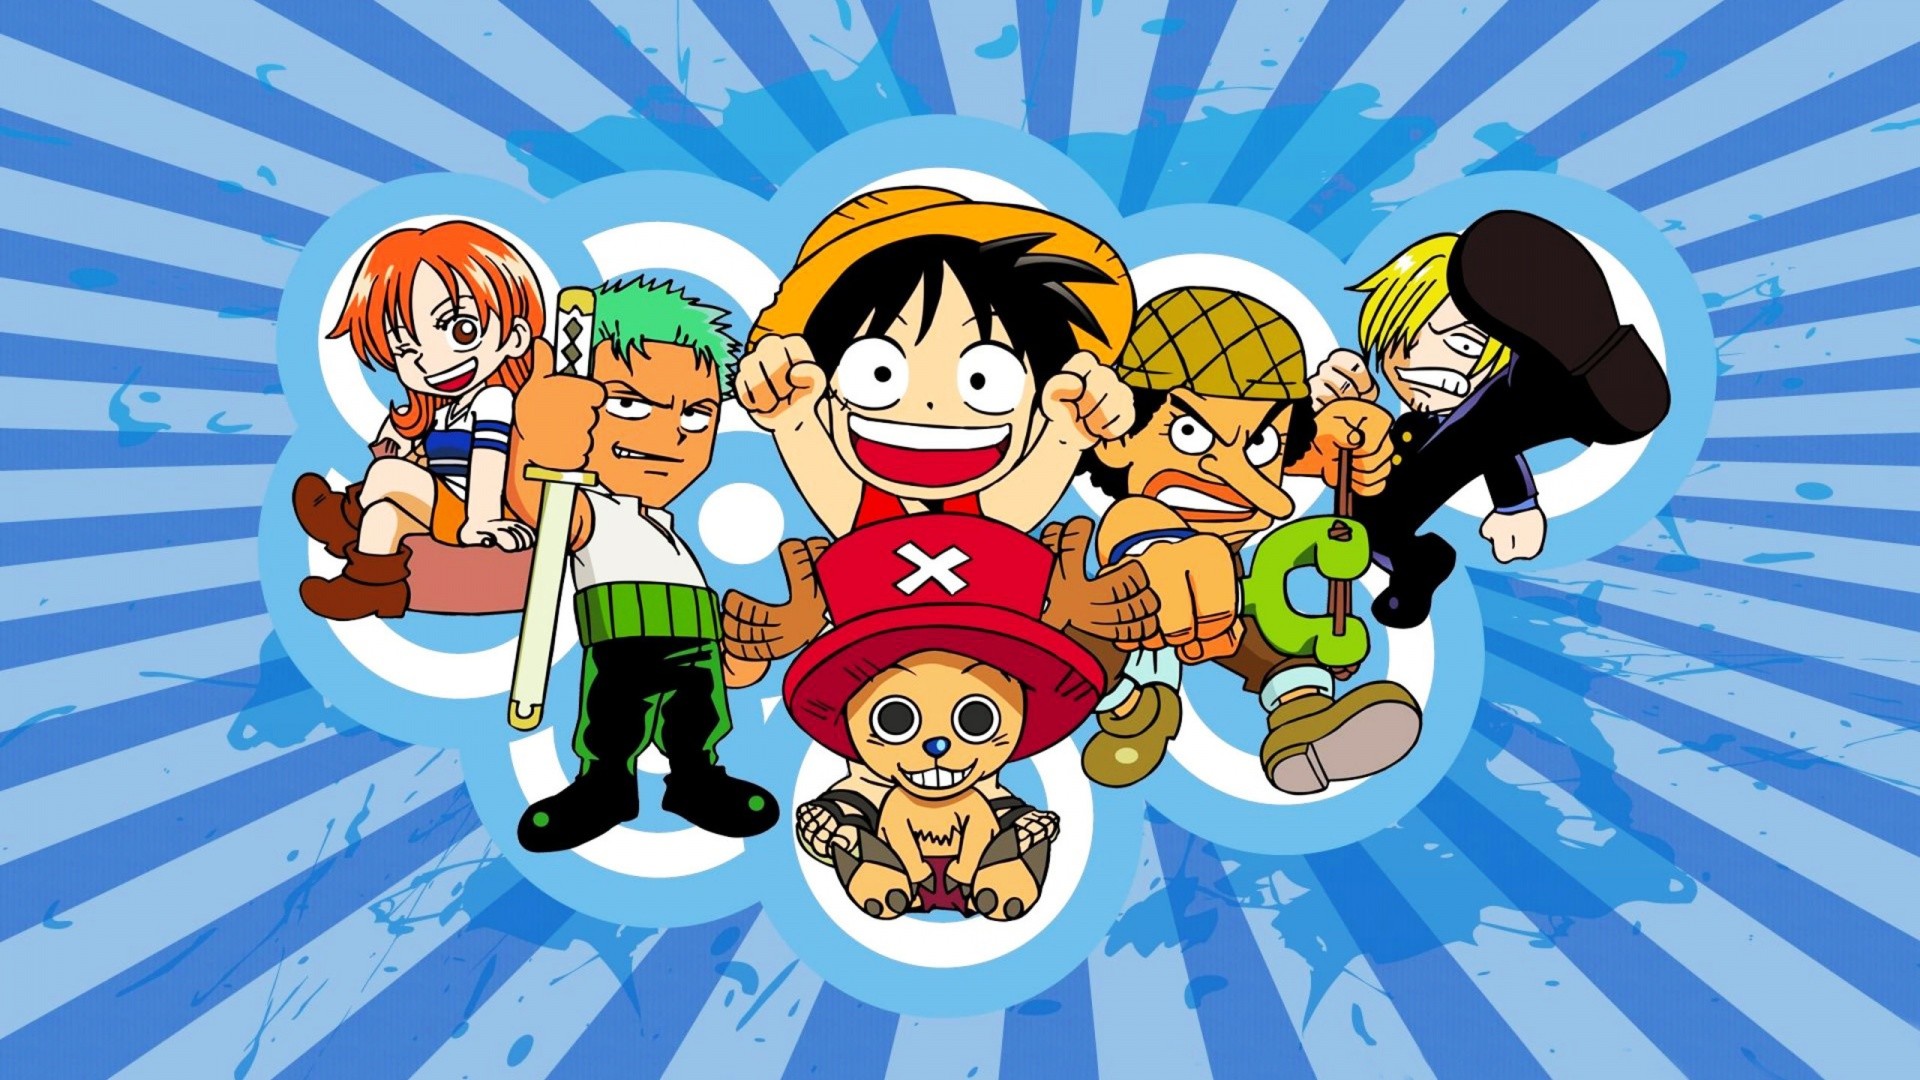 1920x1080 one piece new world wallpapers background, cool wallpapers background,  images of one piece new